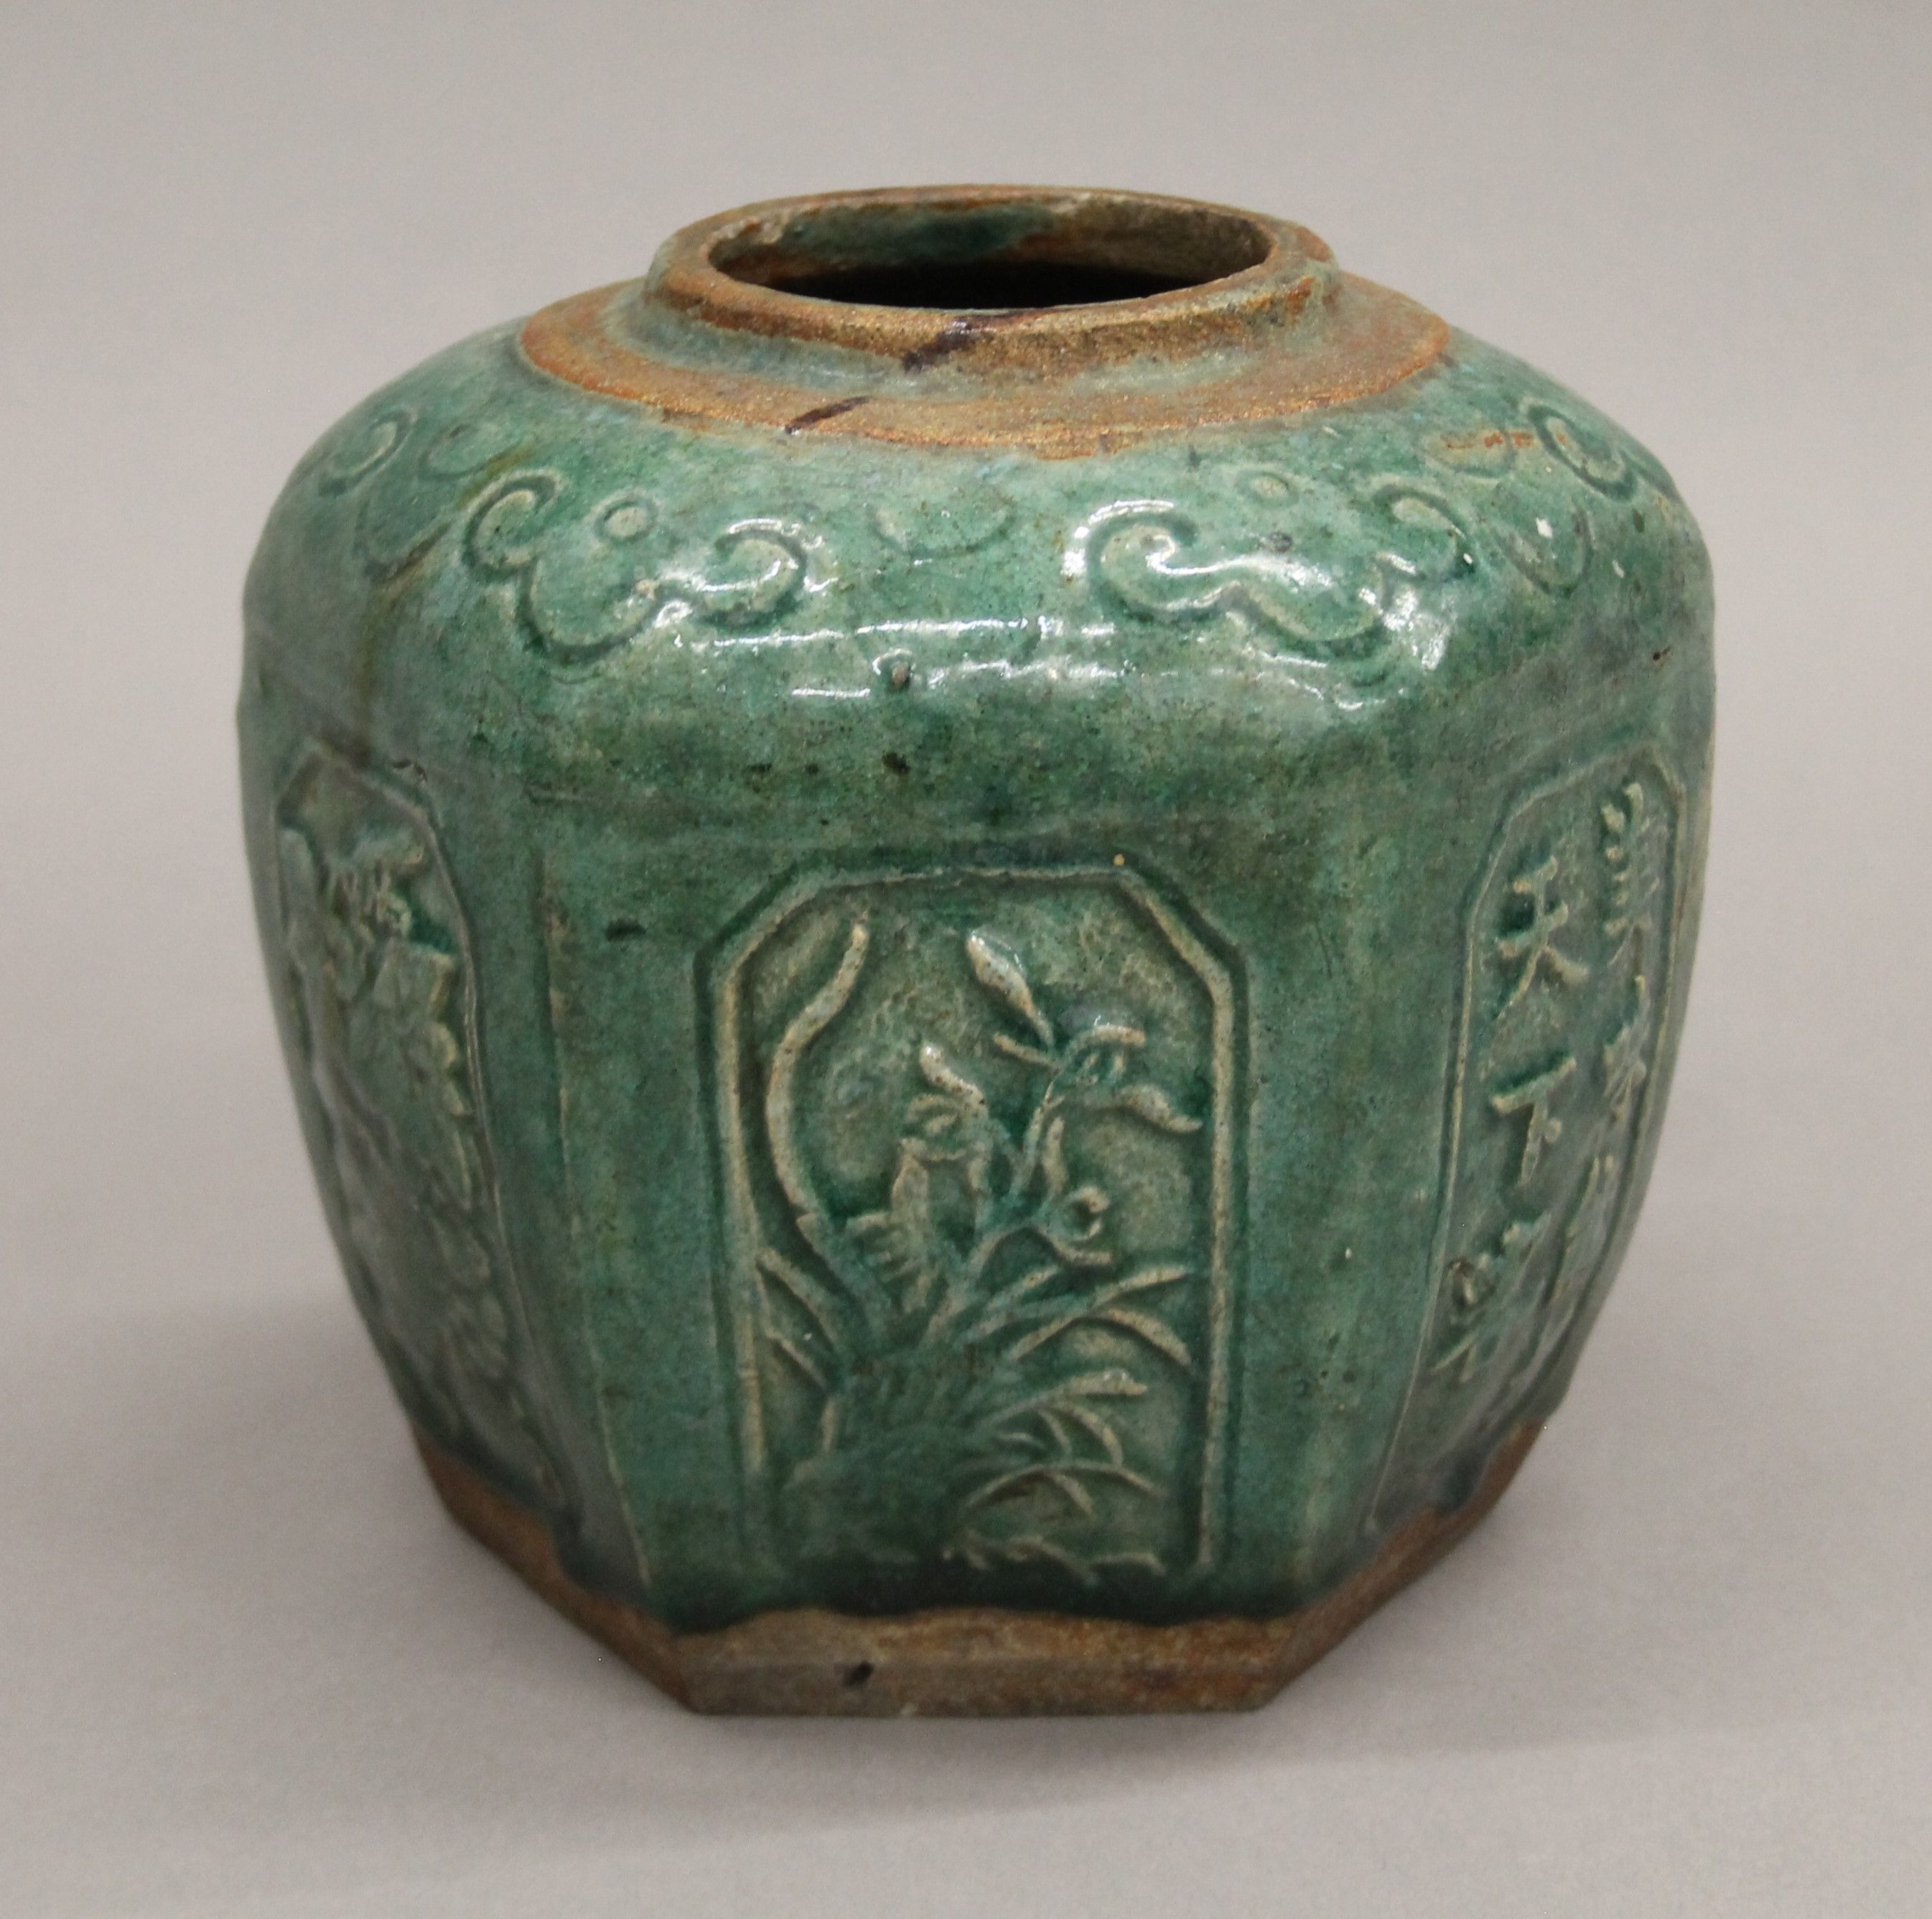 A Chinese green glazed jar, with panels of floral and calligraphy decoration. 14.5 cm high.